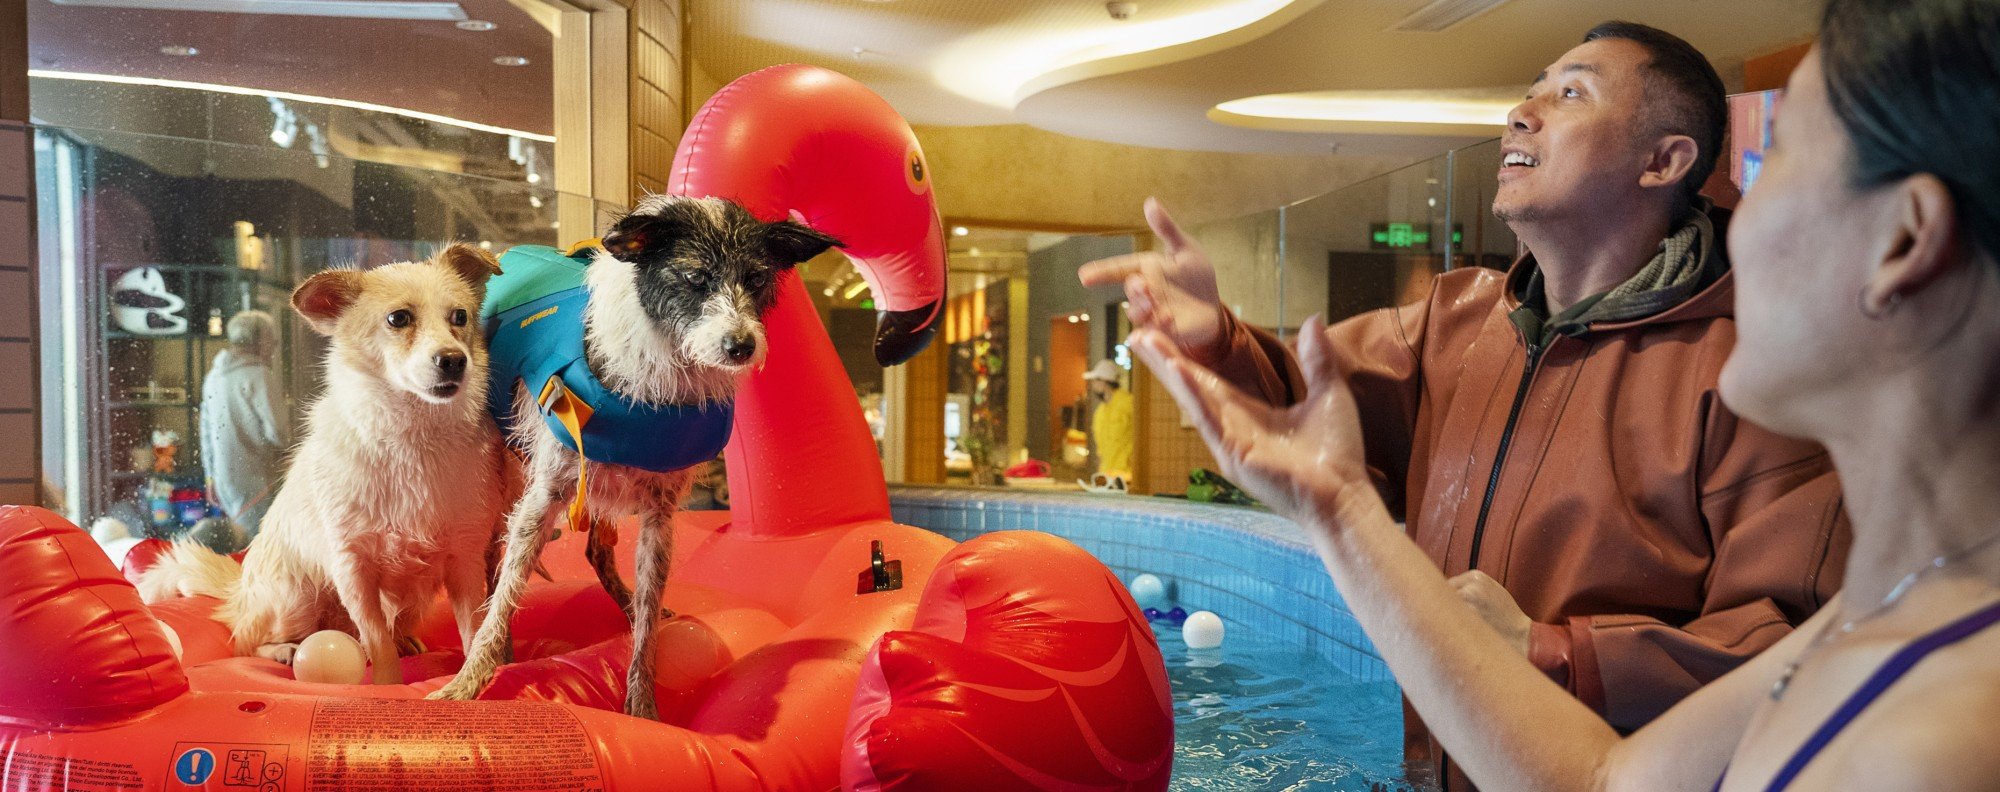 Children? No thanks – pets and partying are the future in China’s new normal